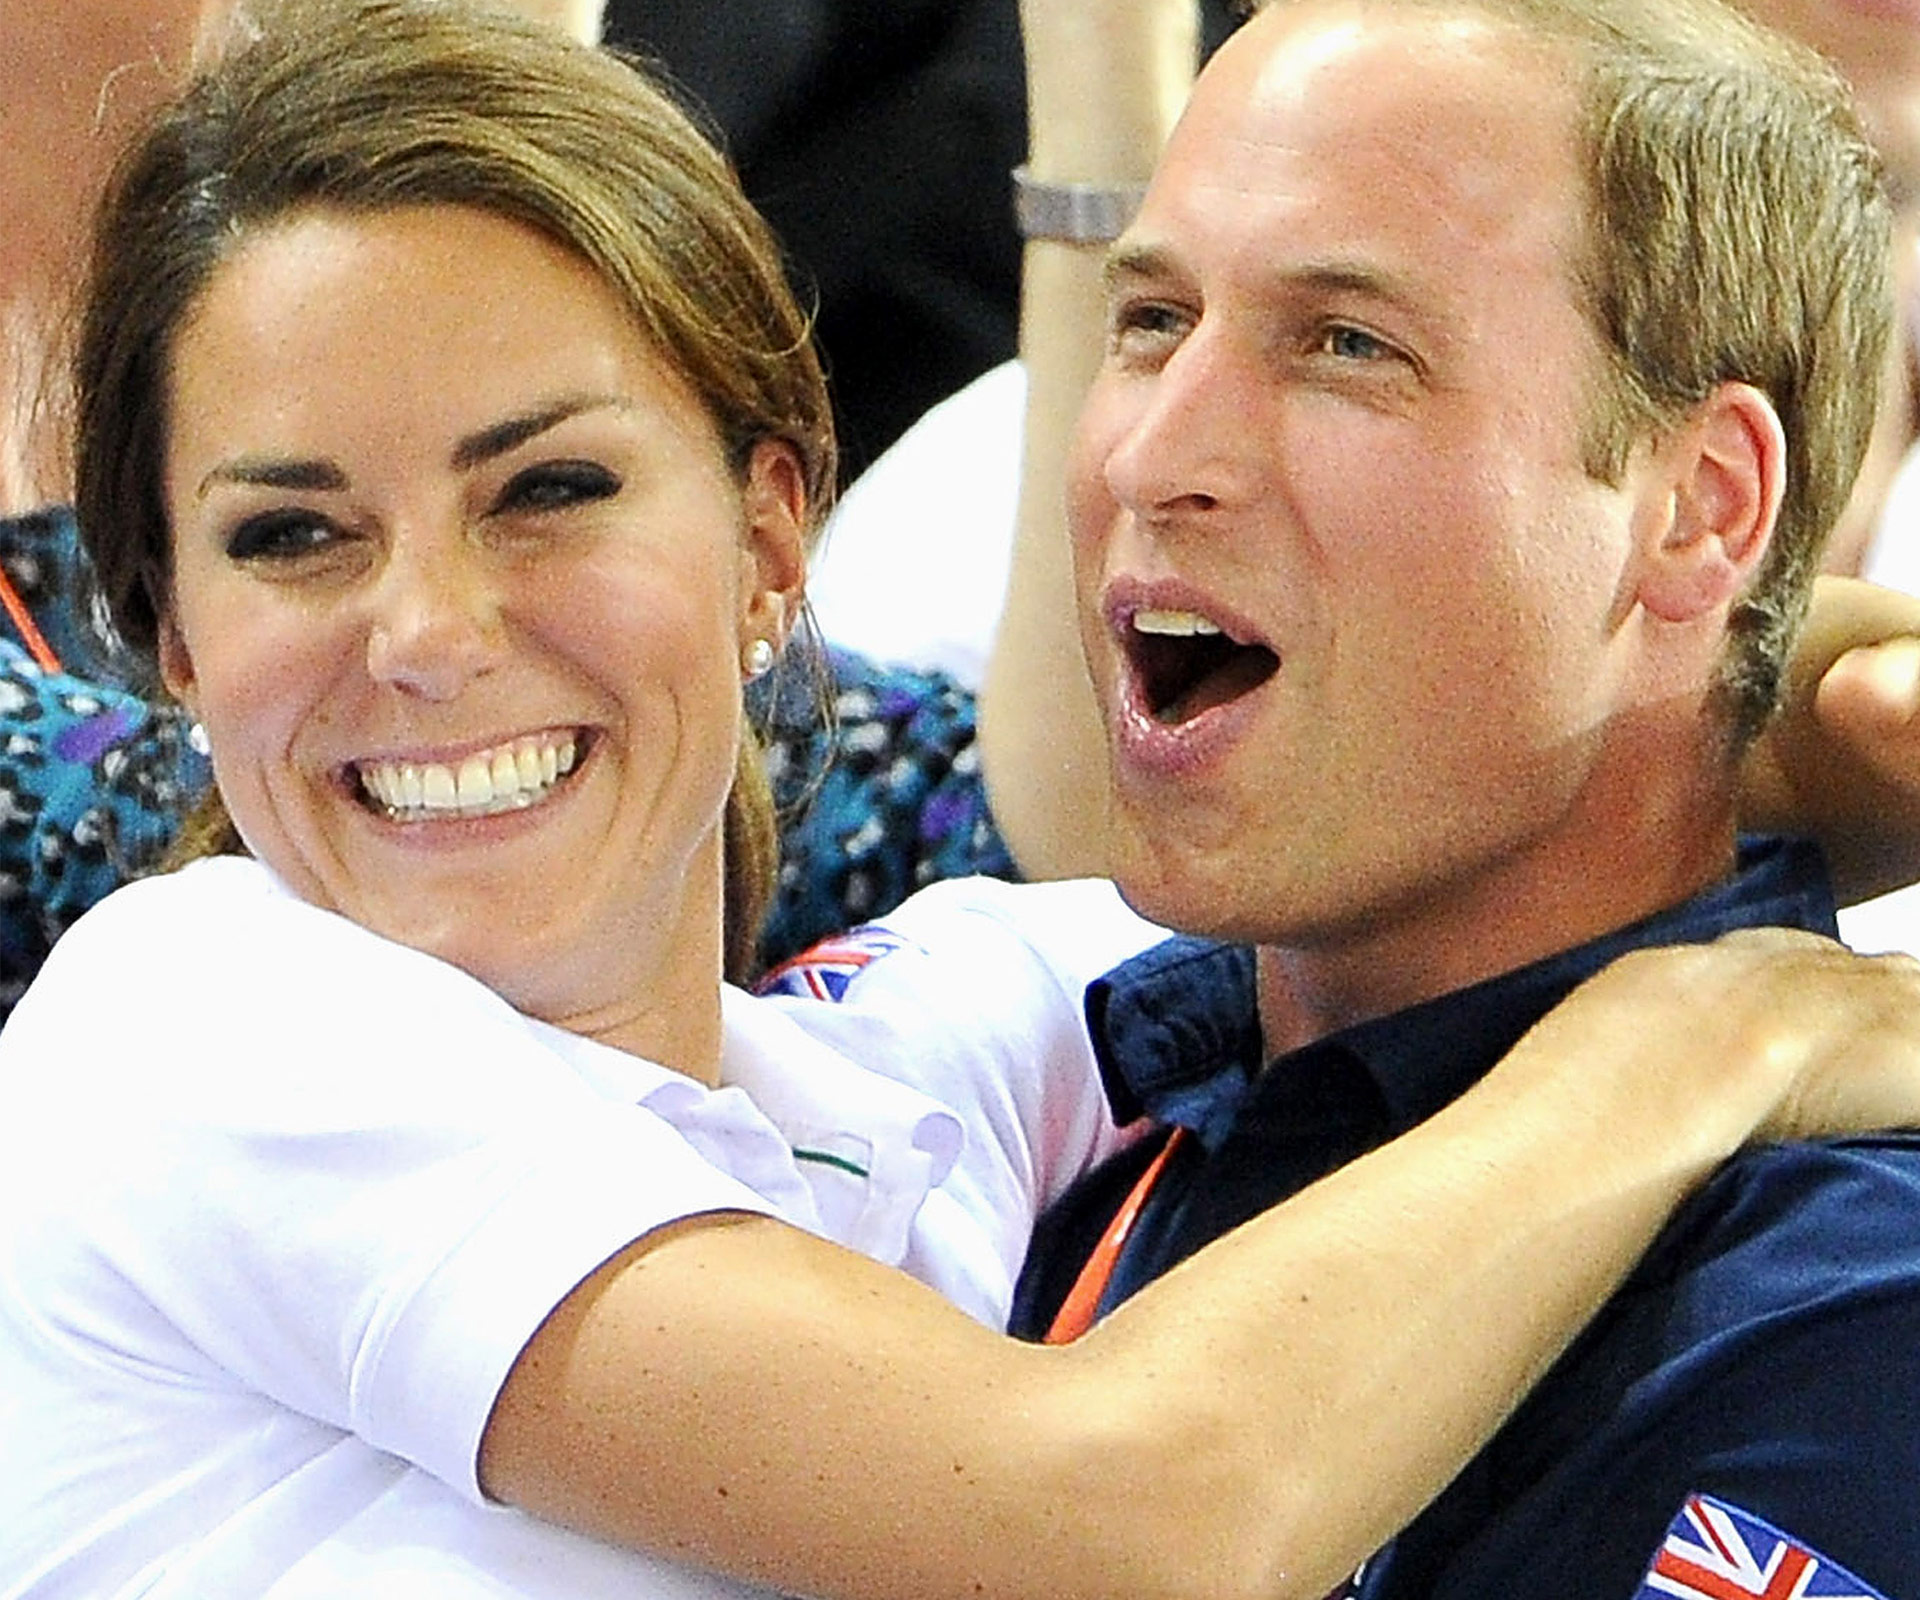 The Duke and Duchess of Cambridge’s sweetest moments